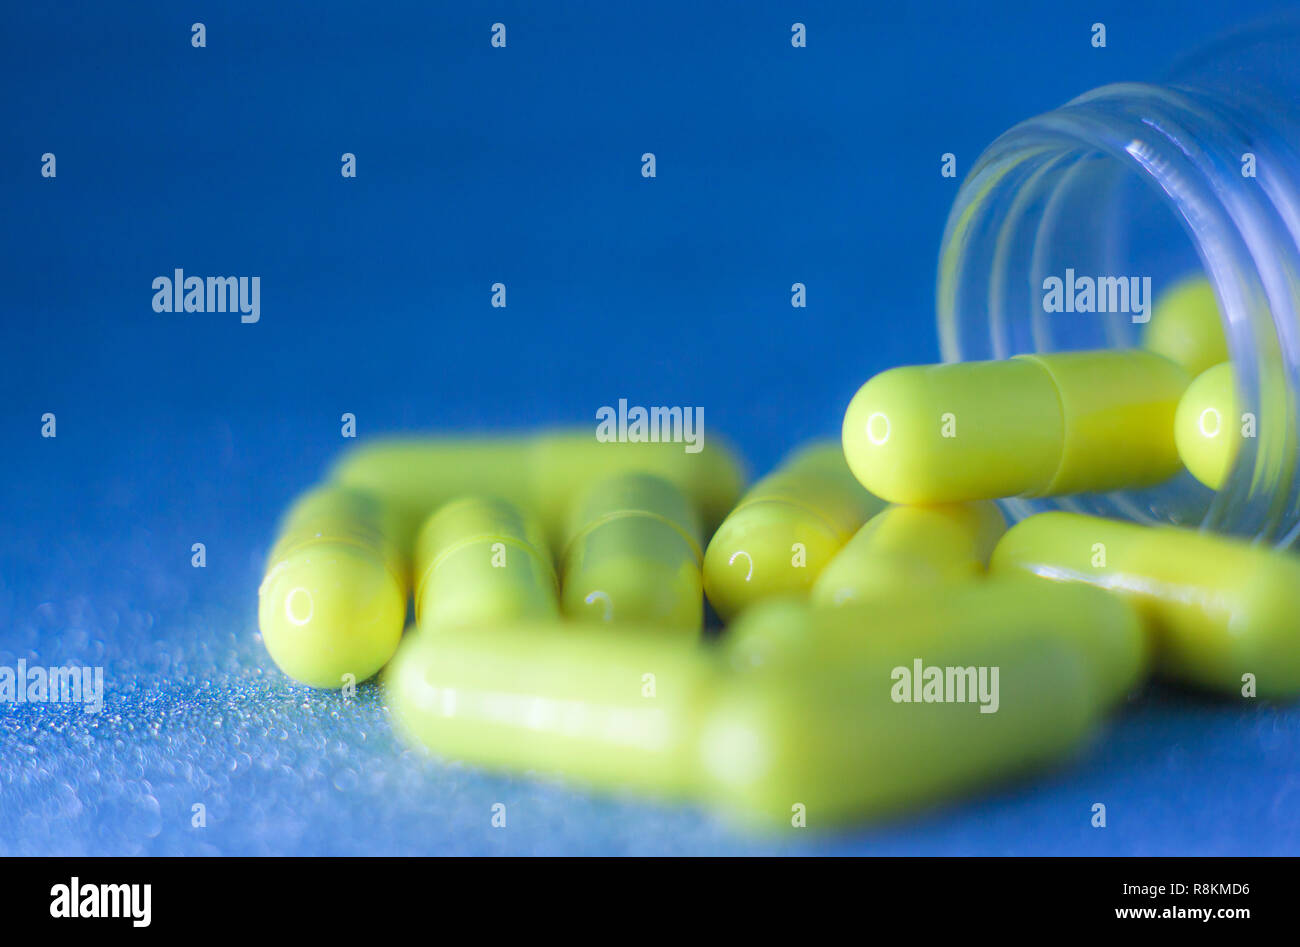 Download Yellow Pill Bottle High Resolution Stock Photography And Images Alamy PSD Mockup Templates